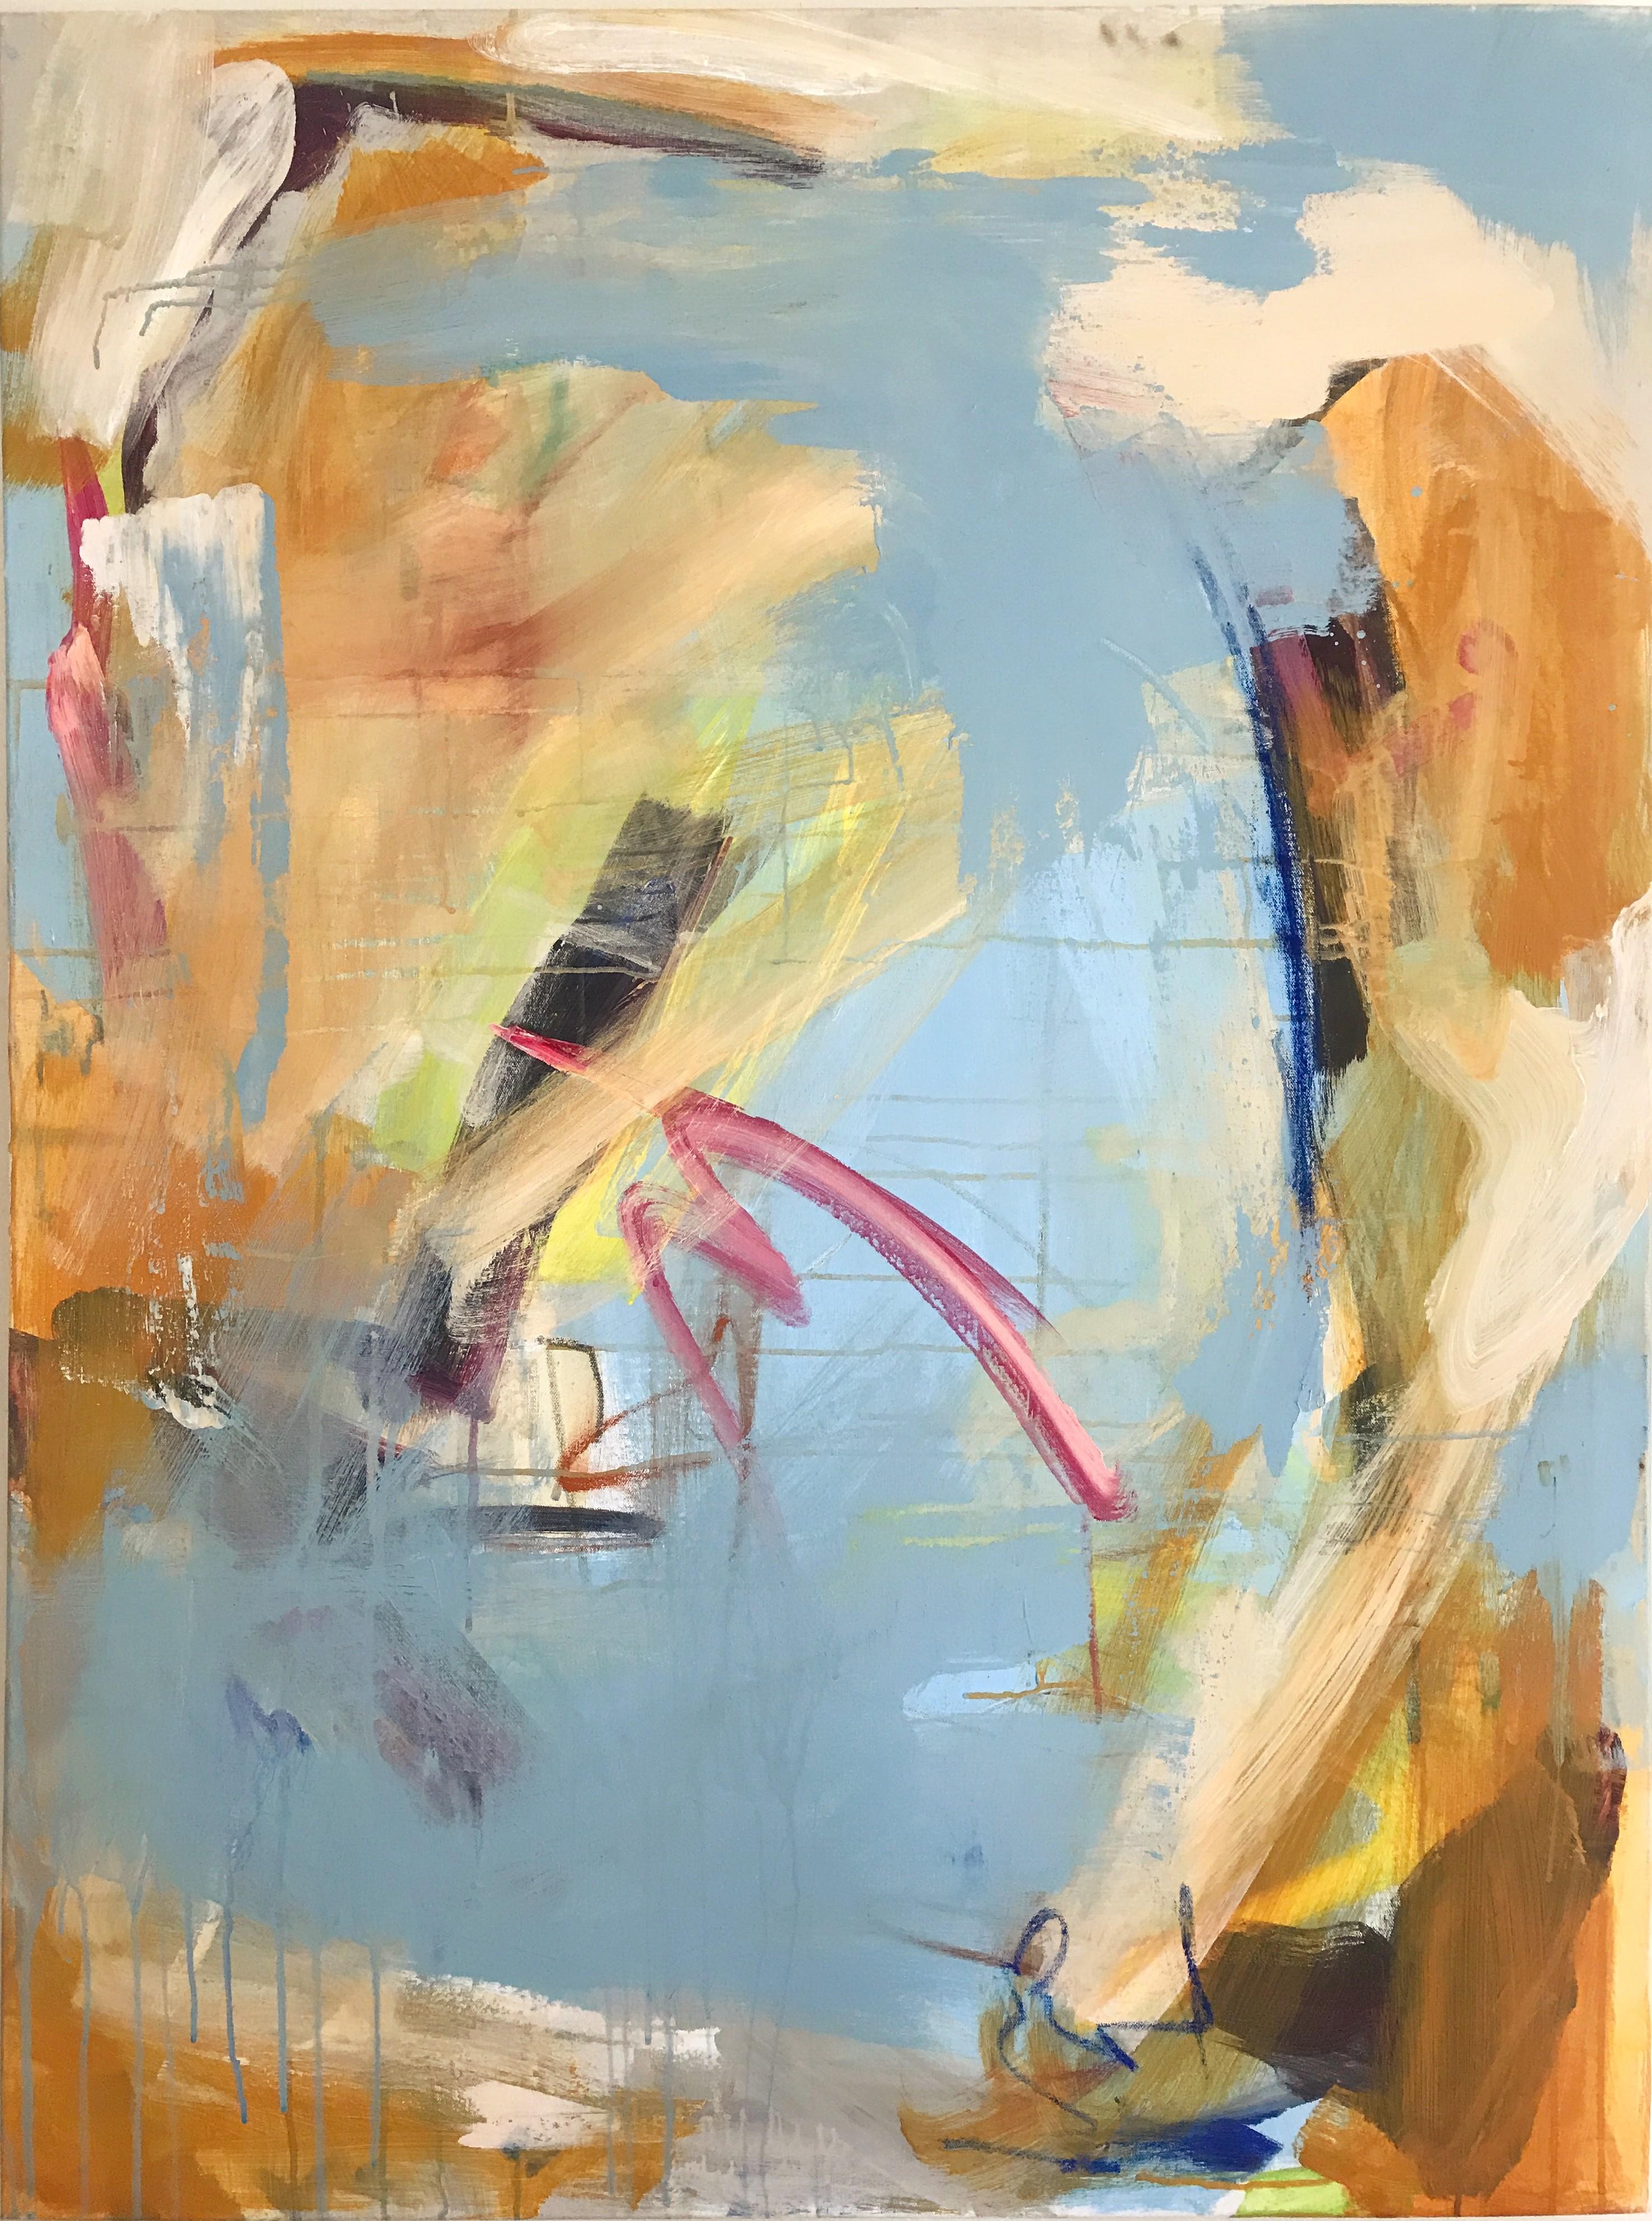 "Untitled Blue" by Bridgette Duran is a unique acrylic and pastel on canvas painting signed and titled by the artist on the back. The original abstract painting measures 48" H x 36" W. The artist painted the sides, and it does not require framing.